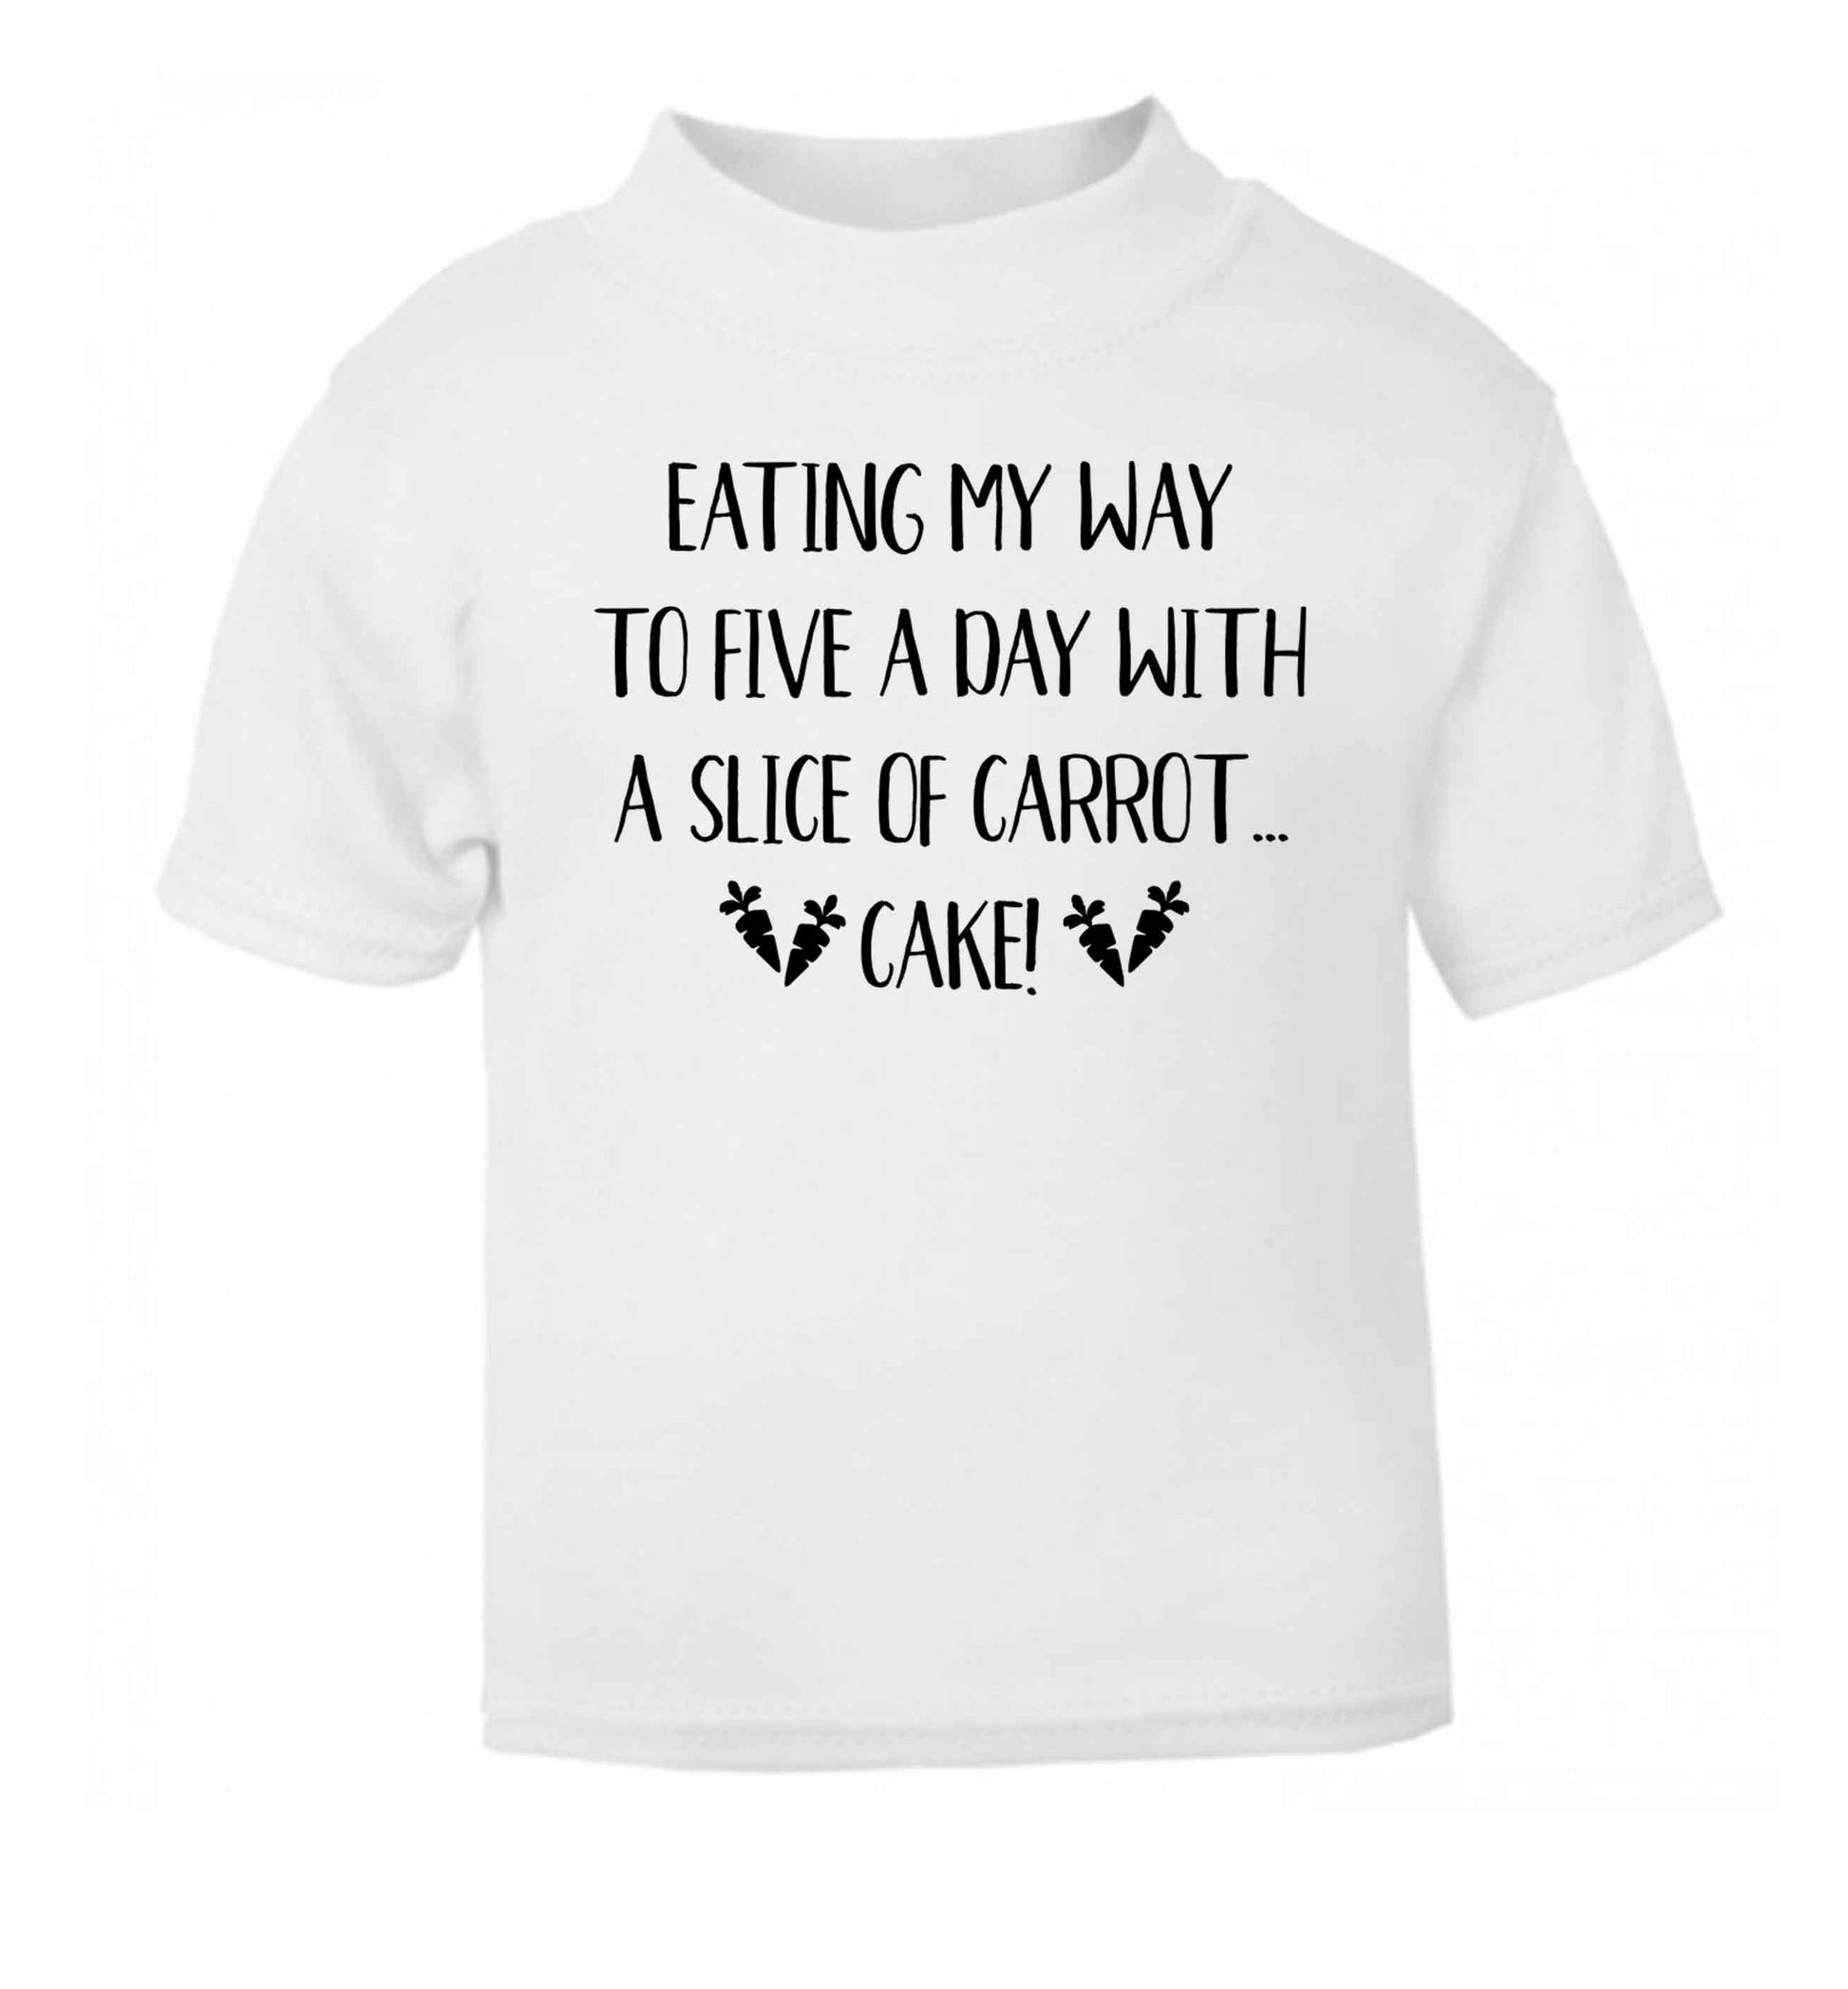 Eating my way to five a day with a slice of carrot cake day white Baby Toddler Tshirt 2 Years